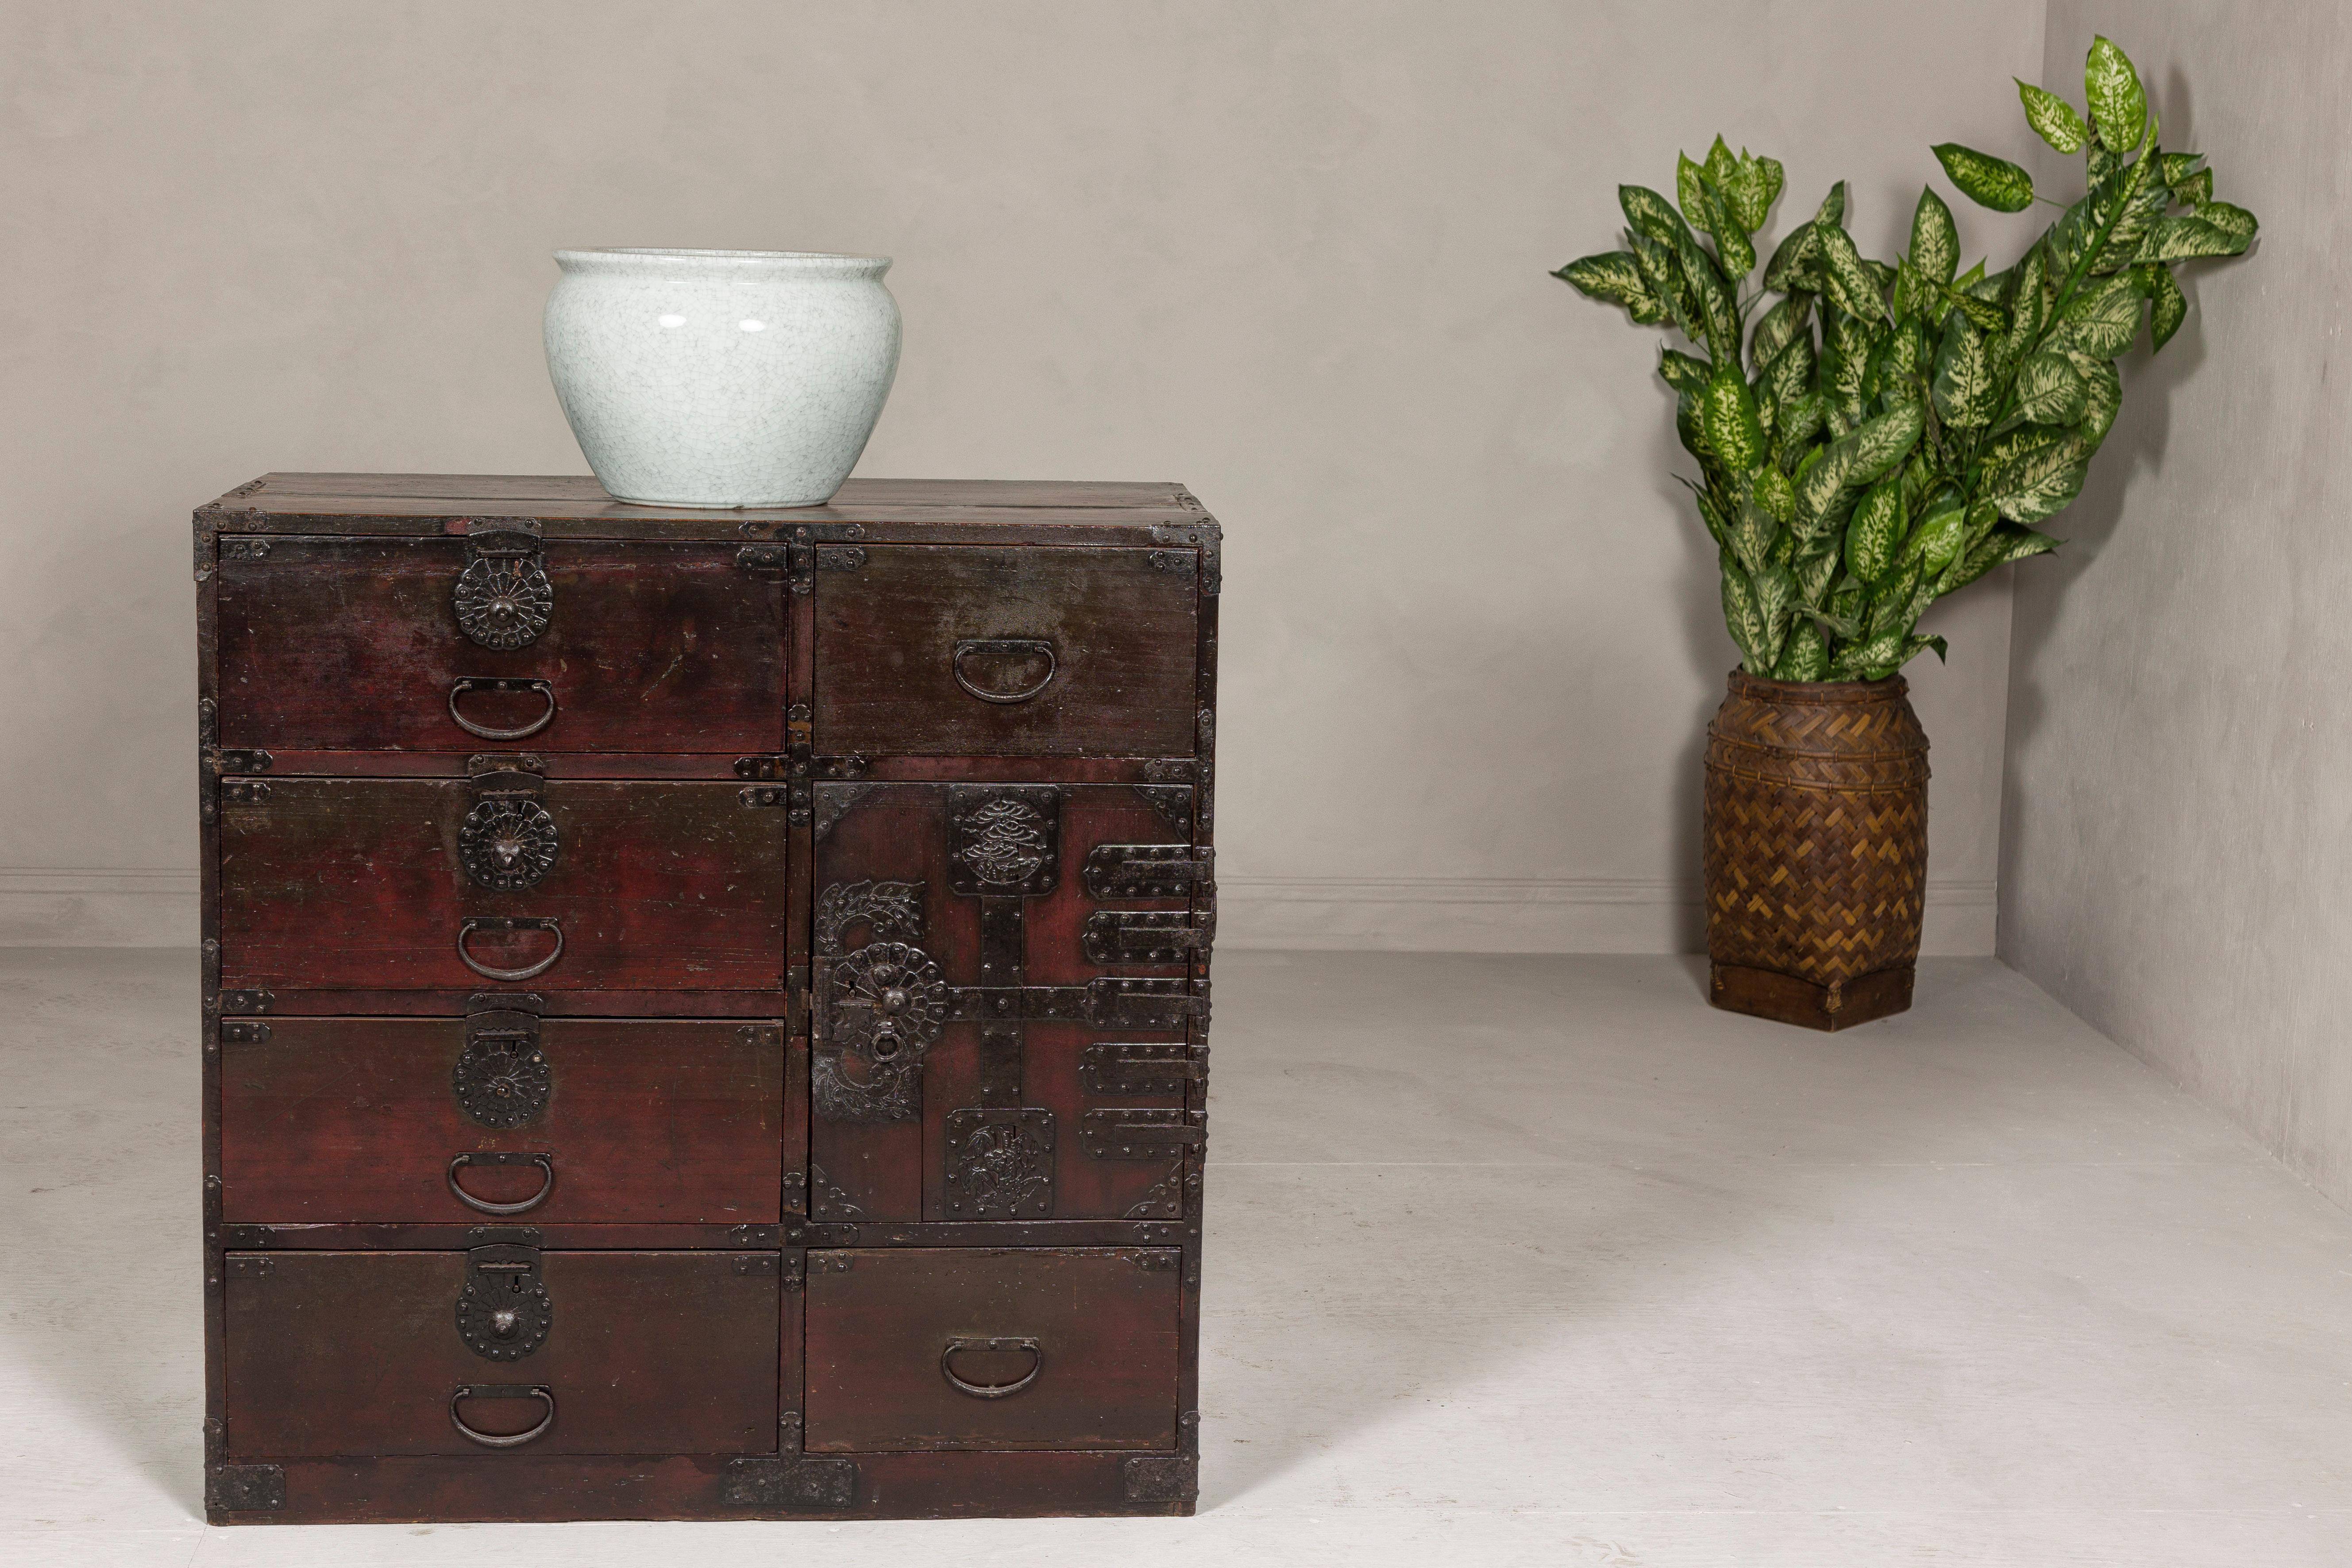 A Japanese Meiji period Sendai type tansu chest from the 19th century with ornate iron hardware, six exterior drawers and safe. Discover the intricate beauty and functional elegance of this Japanese Meiji period Sendai-type tansu chest, a piece from